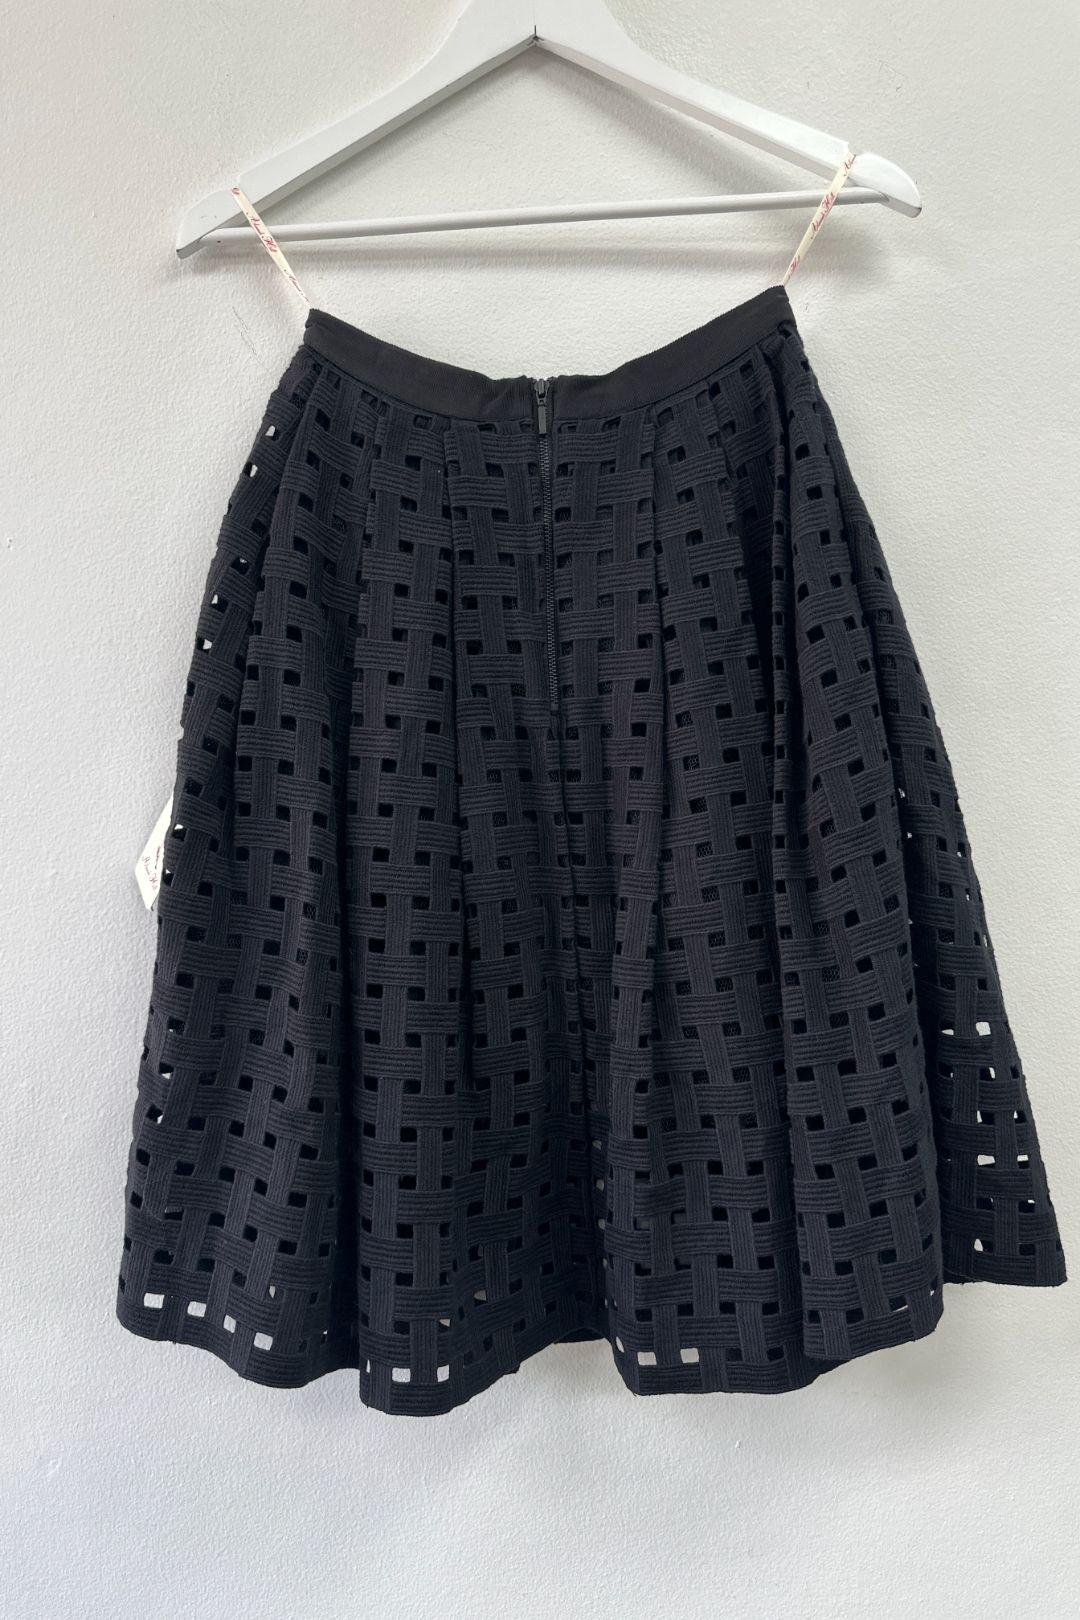 Show Me the Way Skirt in Black